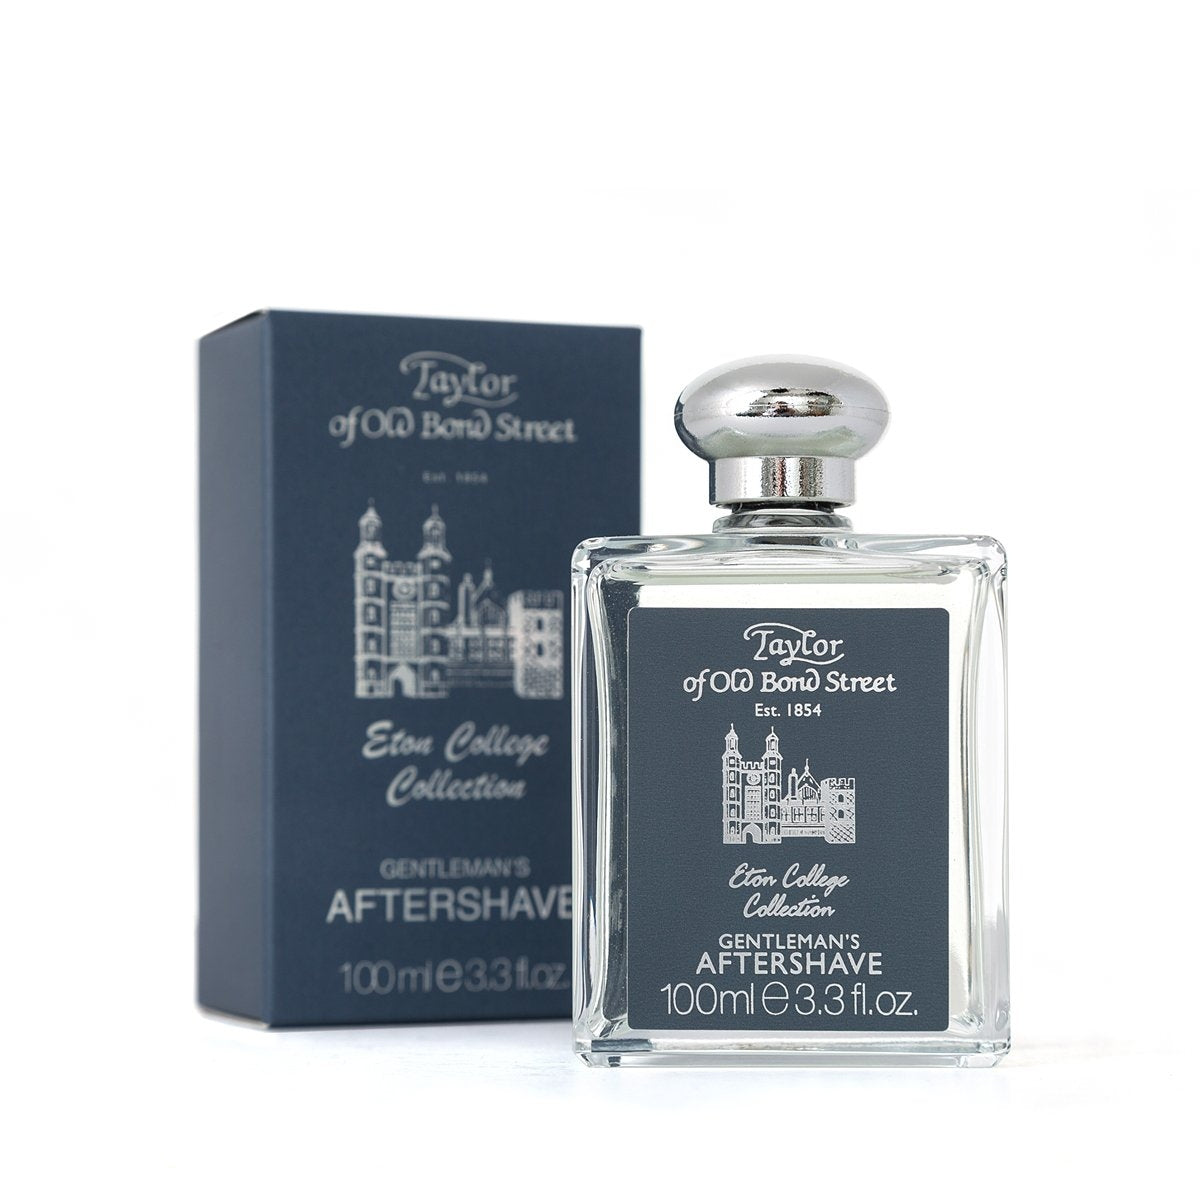 Taylor of Bond Eton College Street | The old Aftershave English Scent